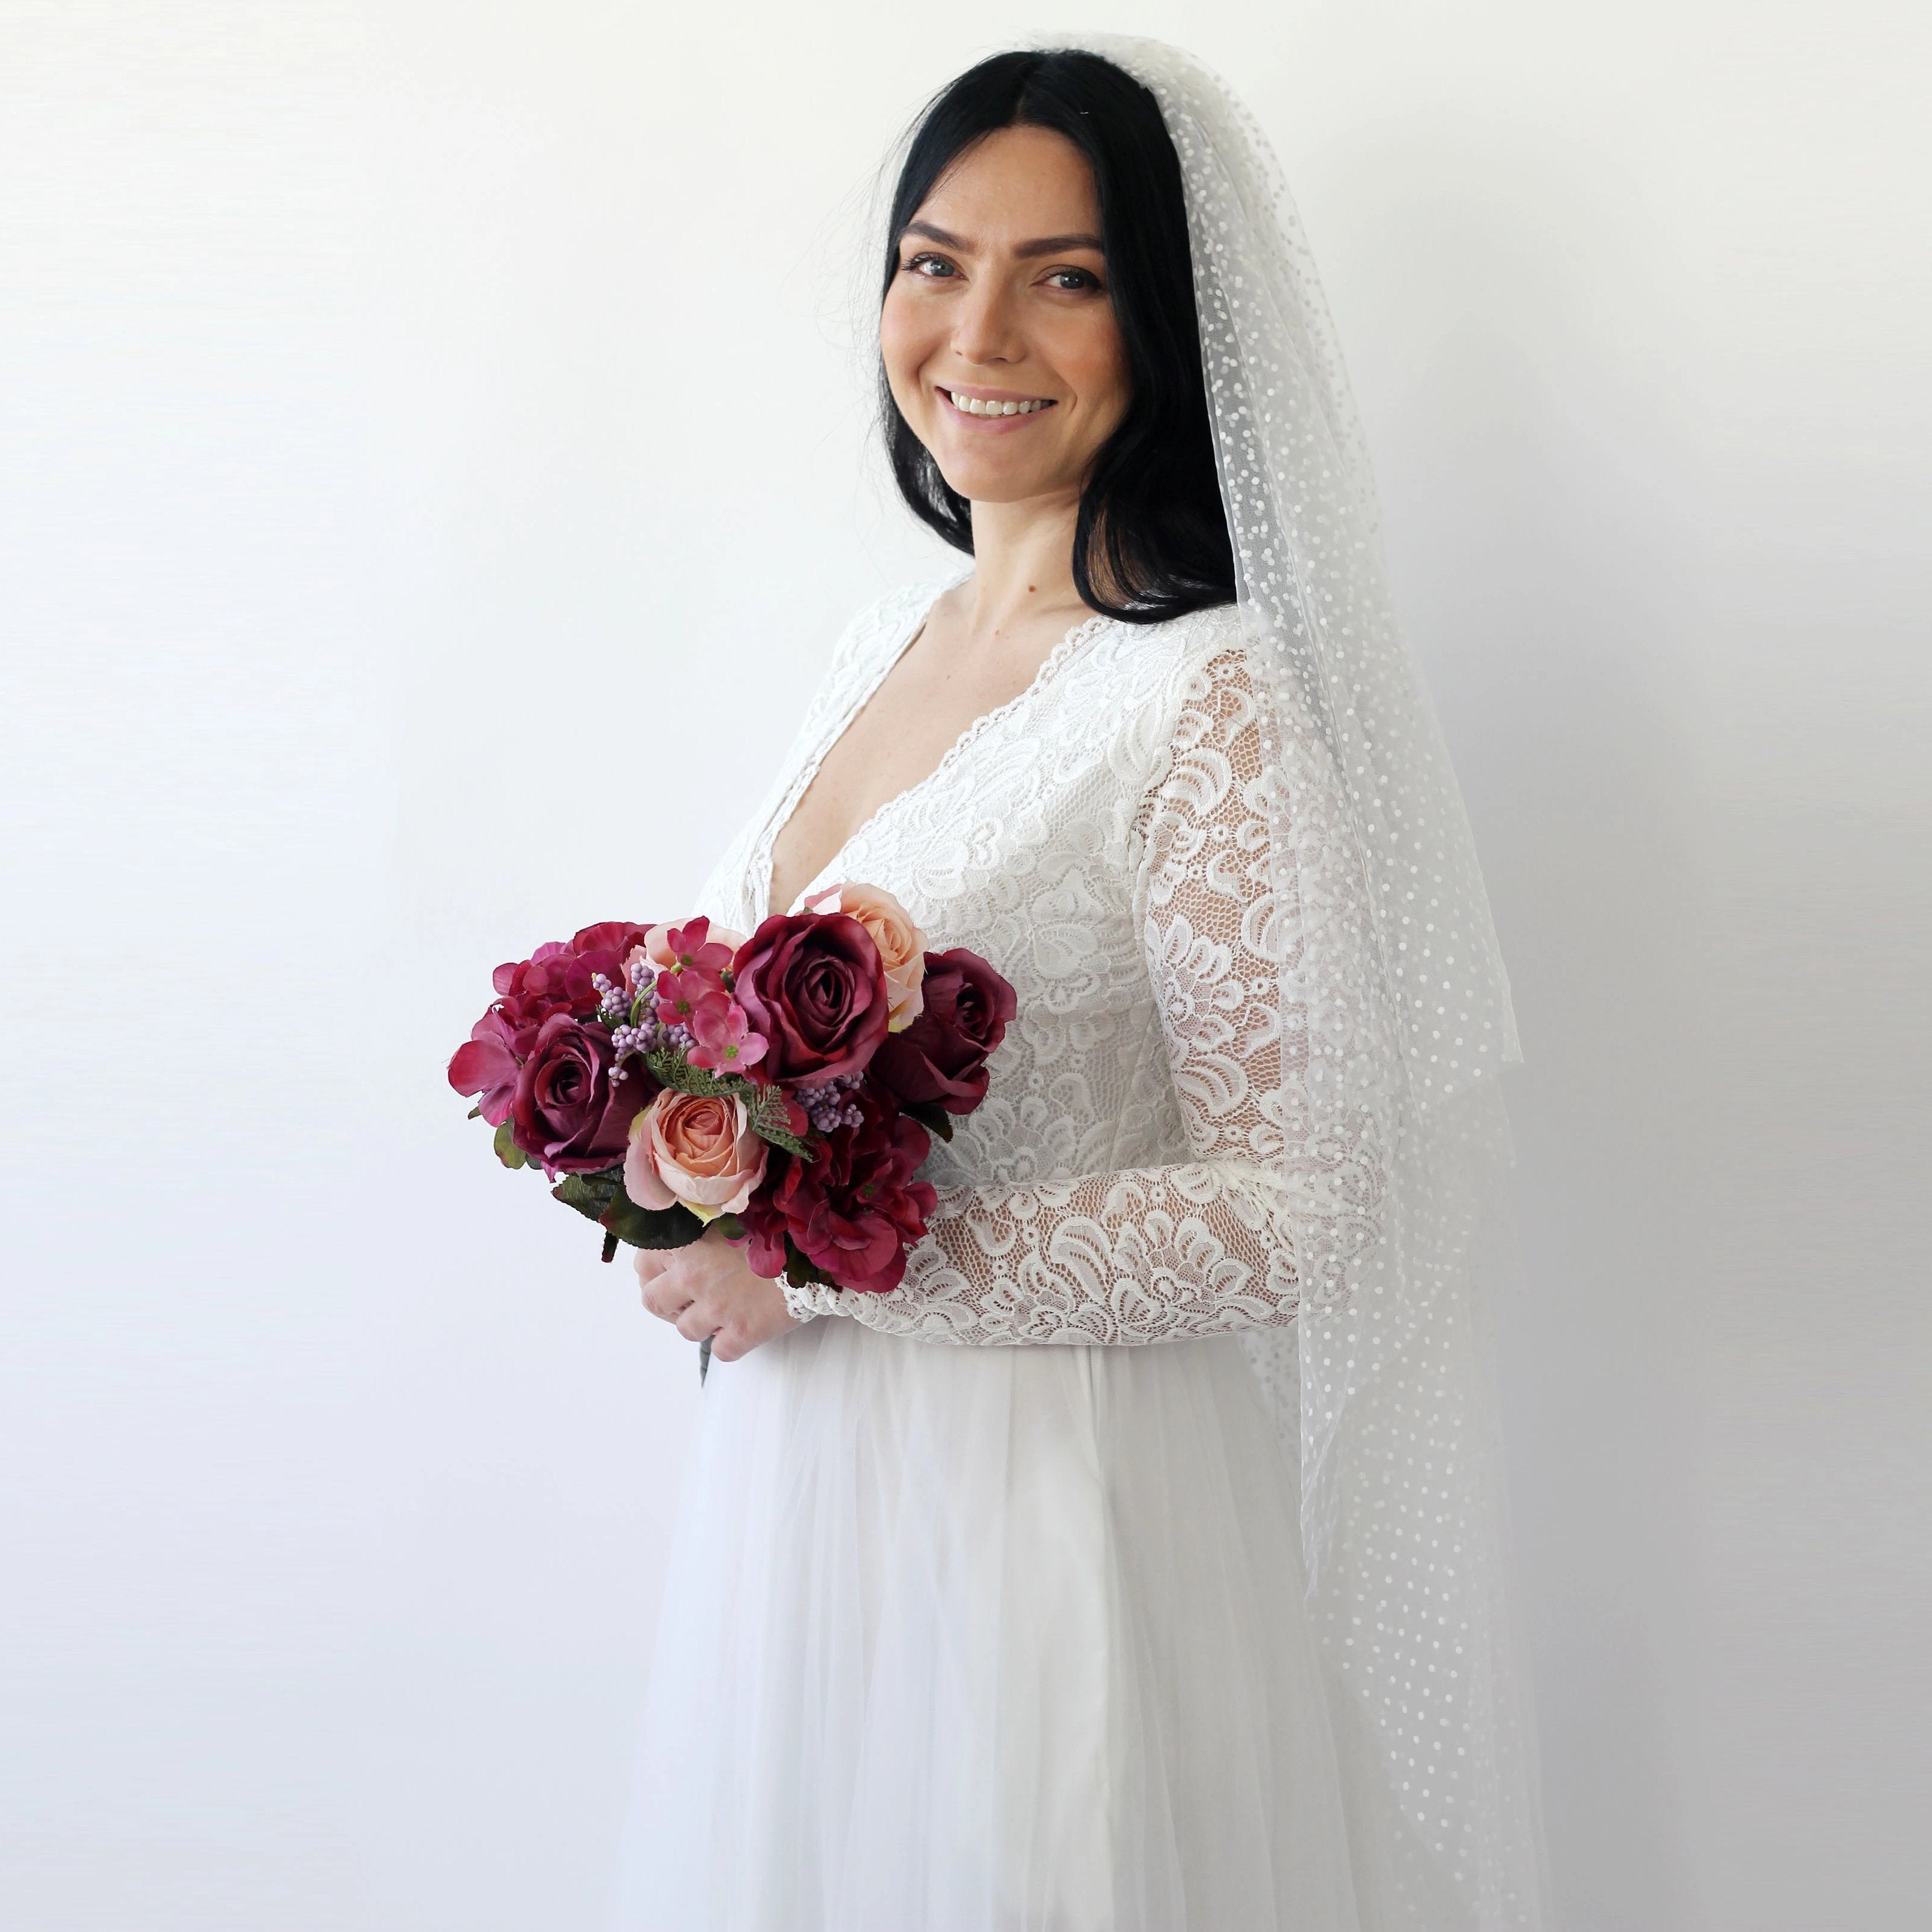 One Blushing Bride Polka Dot Wedding Veil in Ivory Mid Length Point d' Esprit Bridal Veil 32-35 Inches / Without Blusher